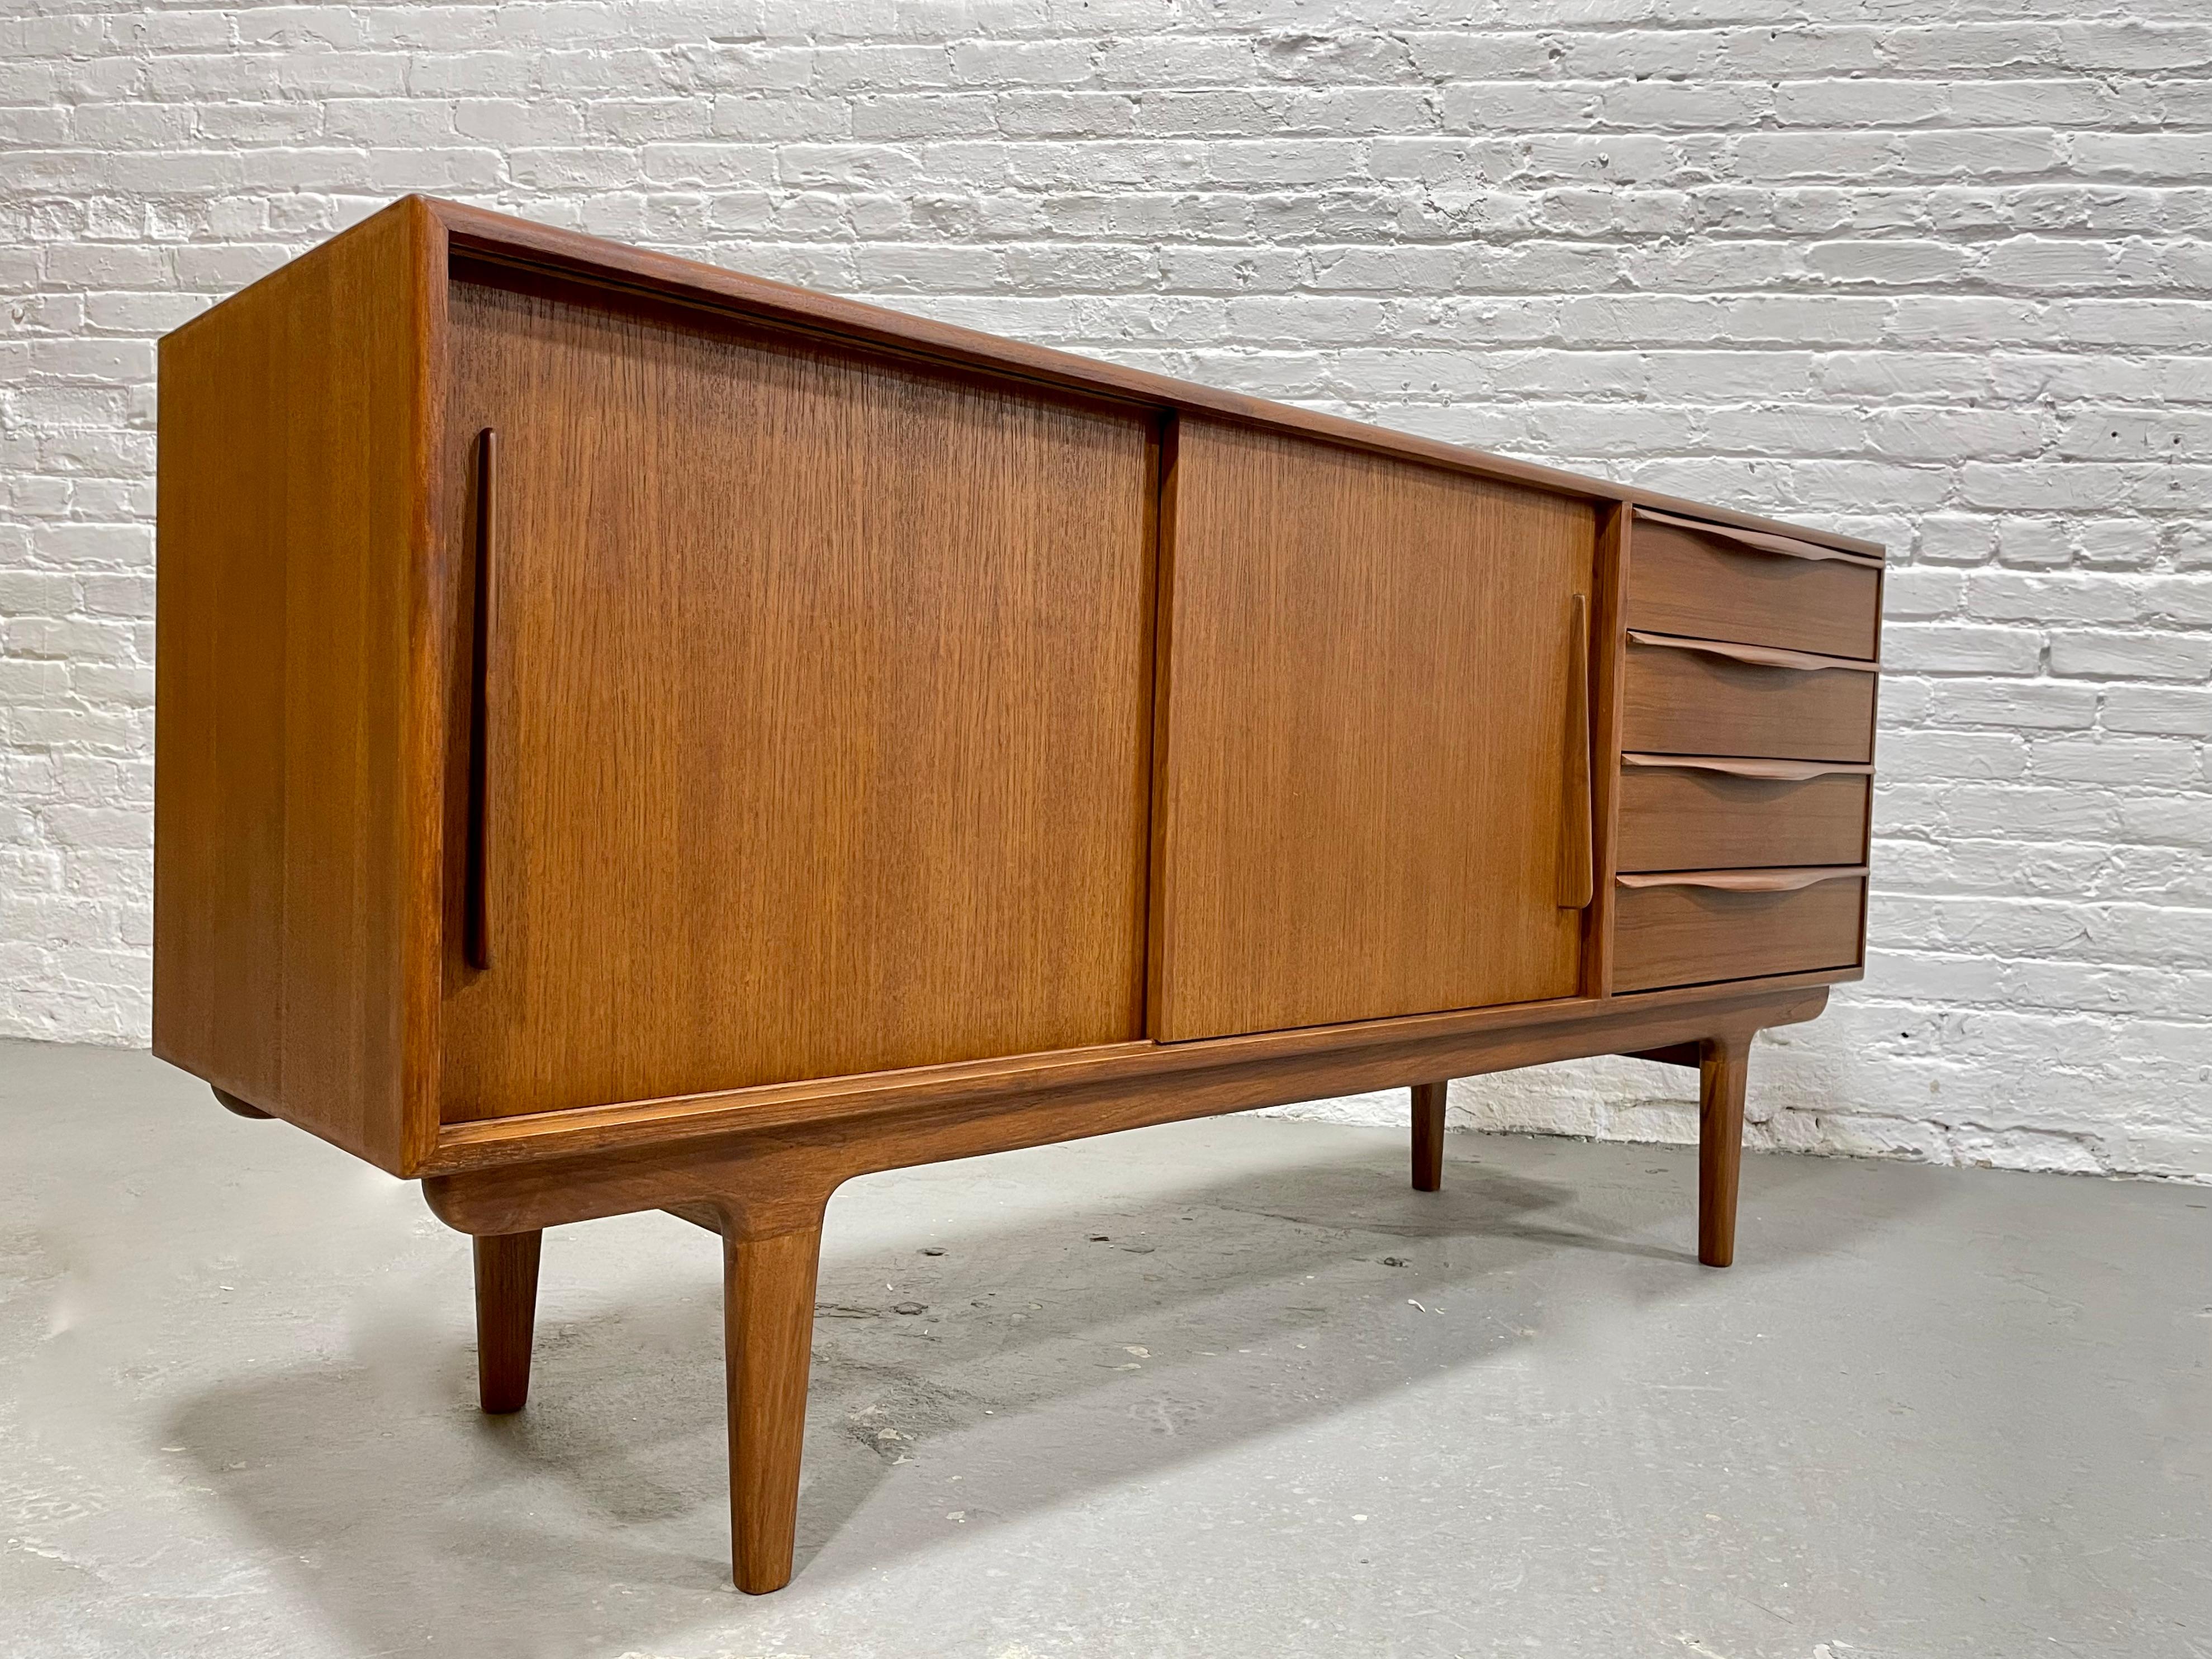 Wood Sculptural Mid-Century Modern Styled Credenza / Media Stand / Sideboard For Sale